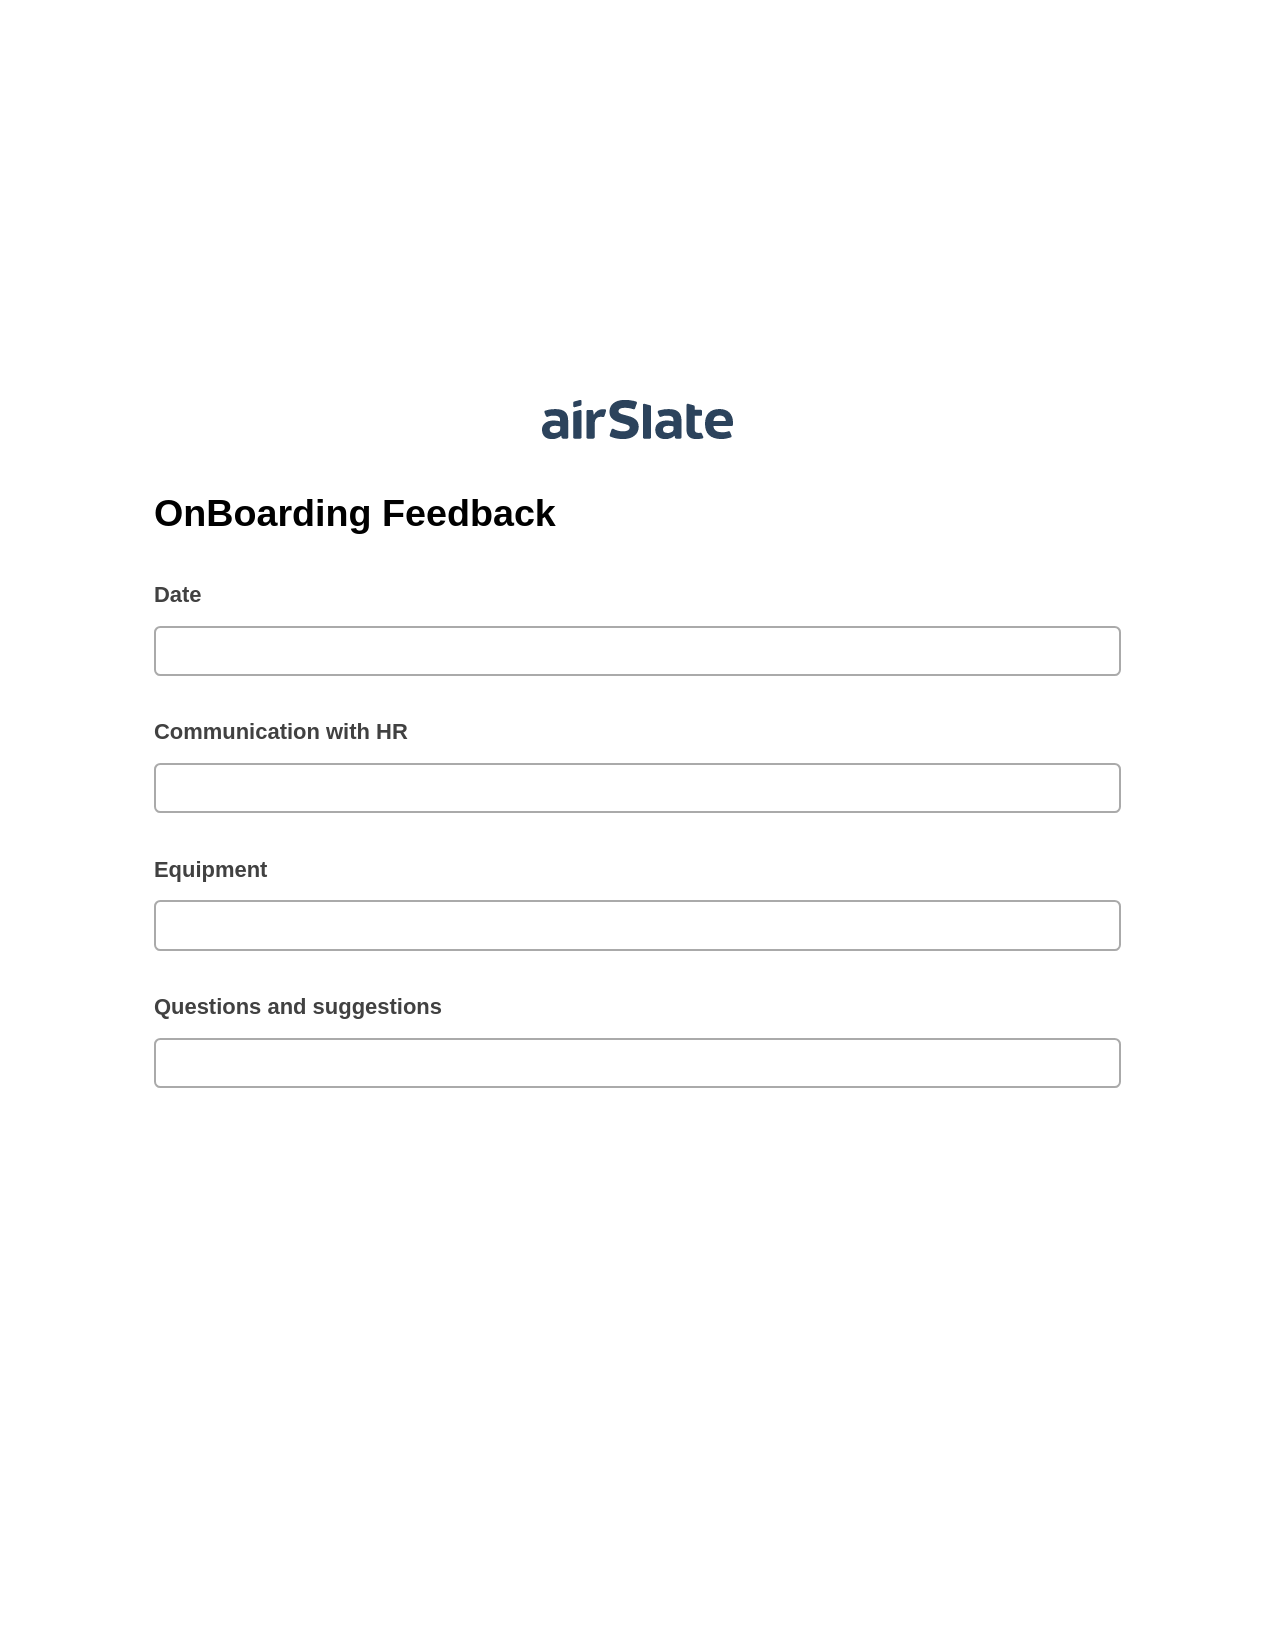 Multirole OnBoarding Feedback Pre-fill Slate from MS Dynamics 365 Records Bot, Reminder Bot, Export to Smartsheet